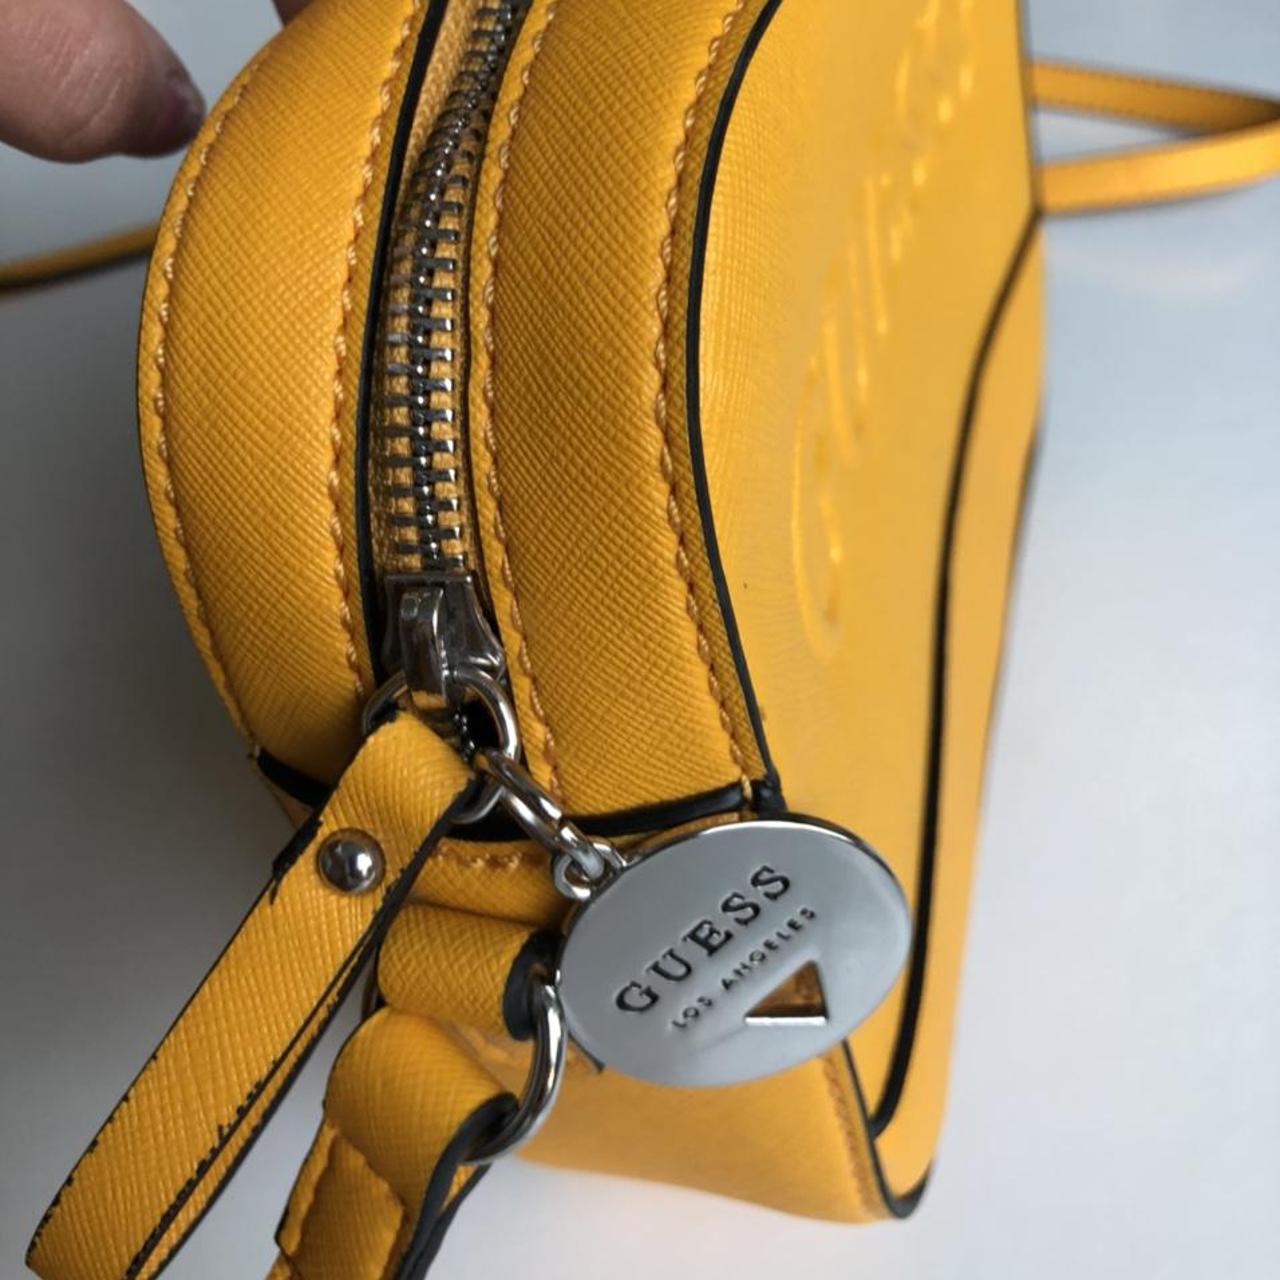 Product Image 2 - GUESS SIDE BAG IN YELLOW

Worn